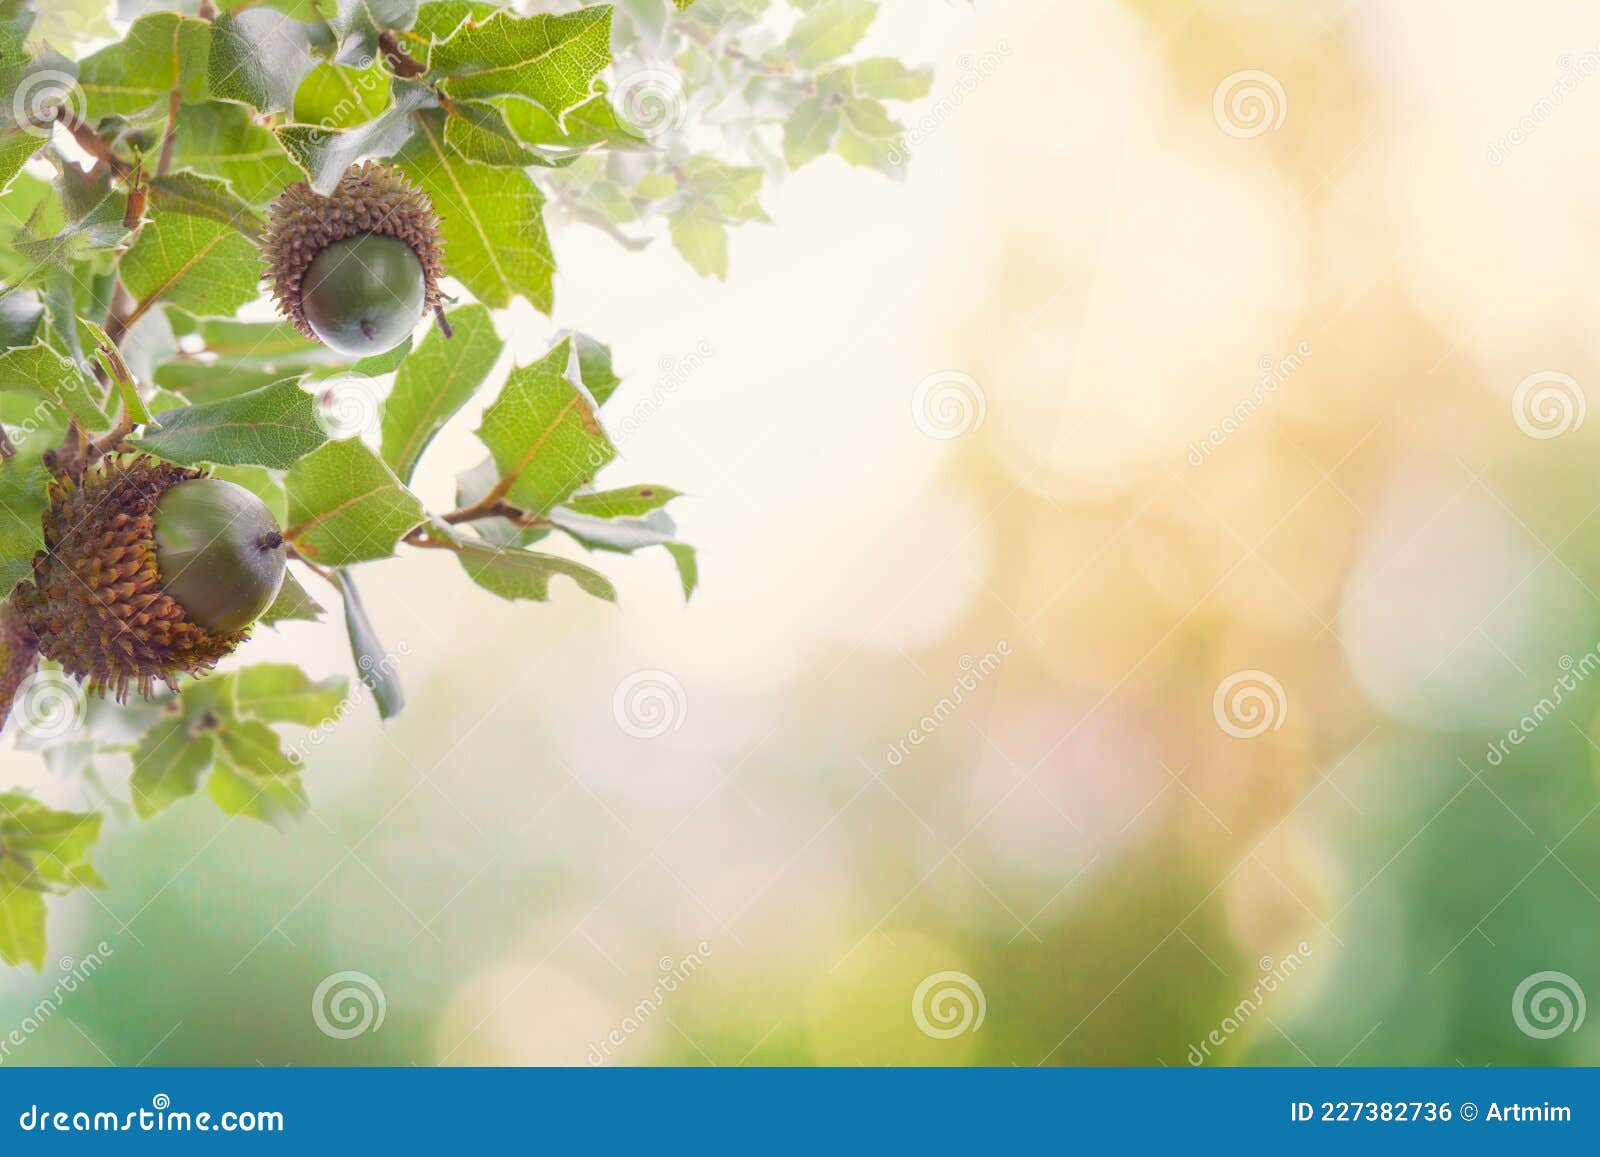 Nature Background with Acorn, Oak Leaves and Bokeh Stock Photo Image of defocused, copy: 227382736